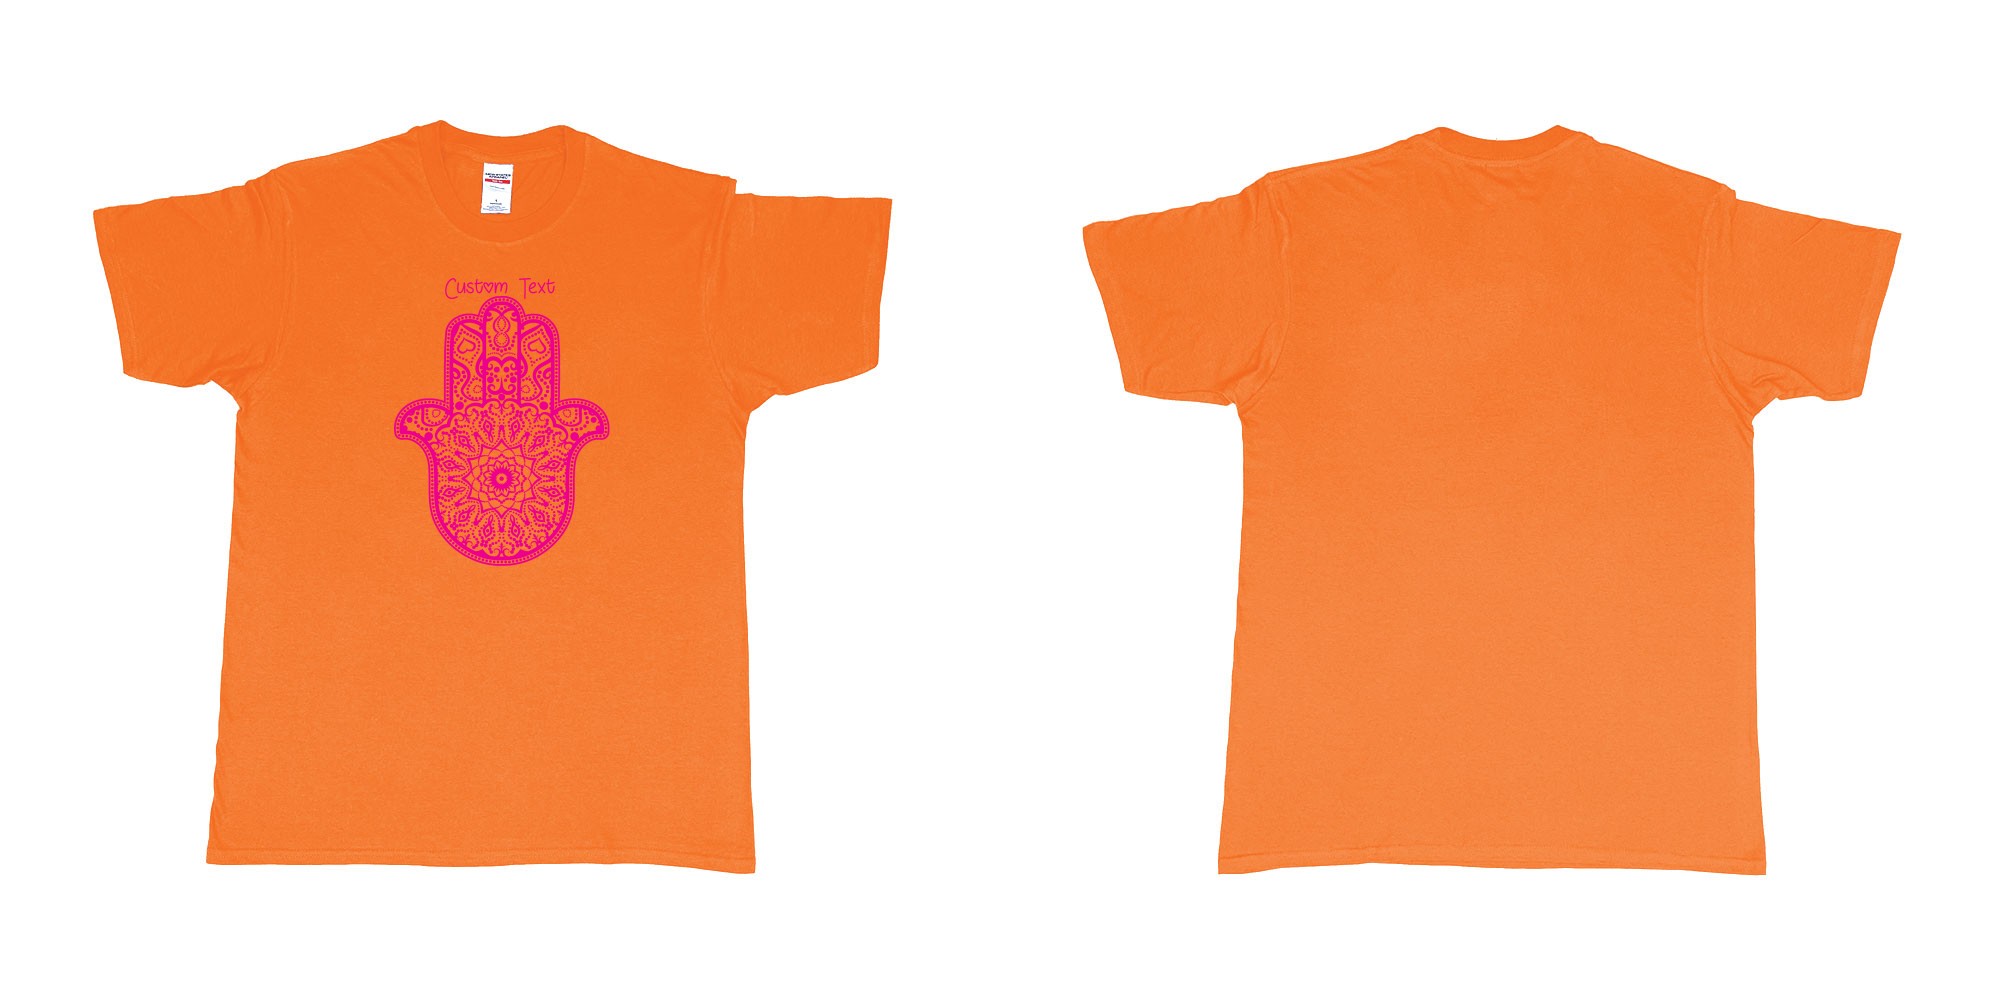 Custom tshirt design hamsa hand mandala custom text in fabric color orange choice your own text made in Bali by The Pirate Way